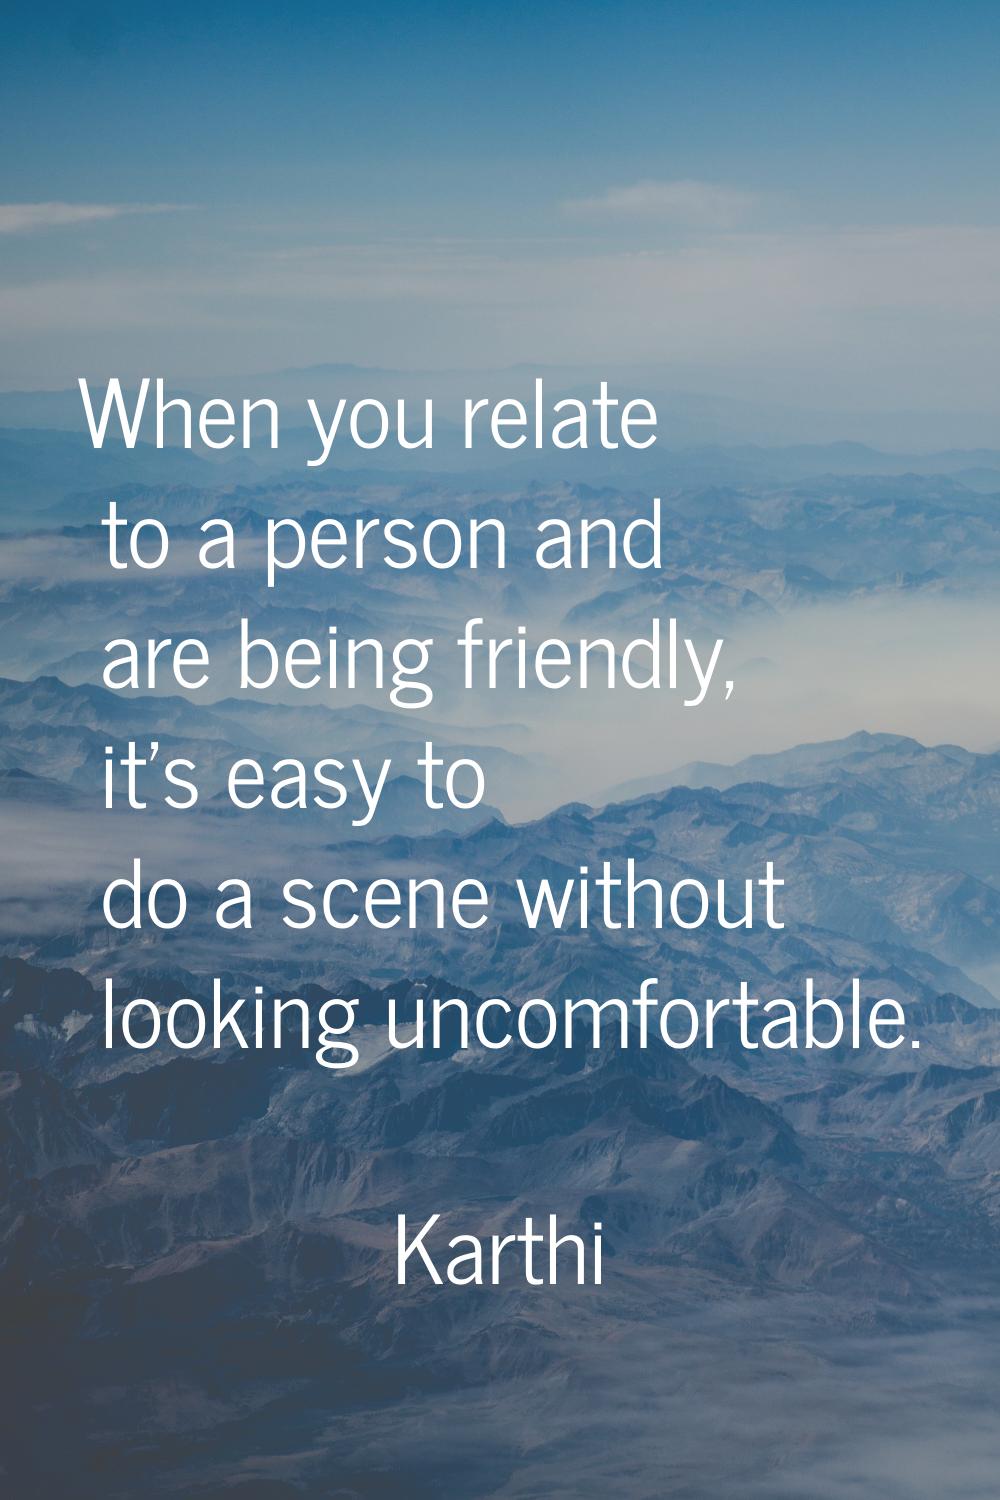 When you relate to a person and are being friendly, it's easy to do a scene without looking uncomfo